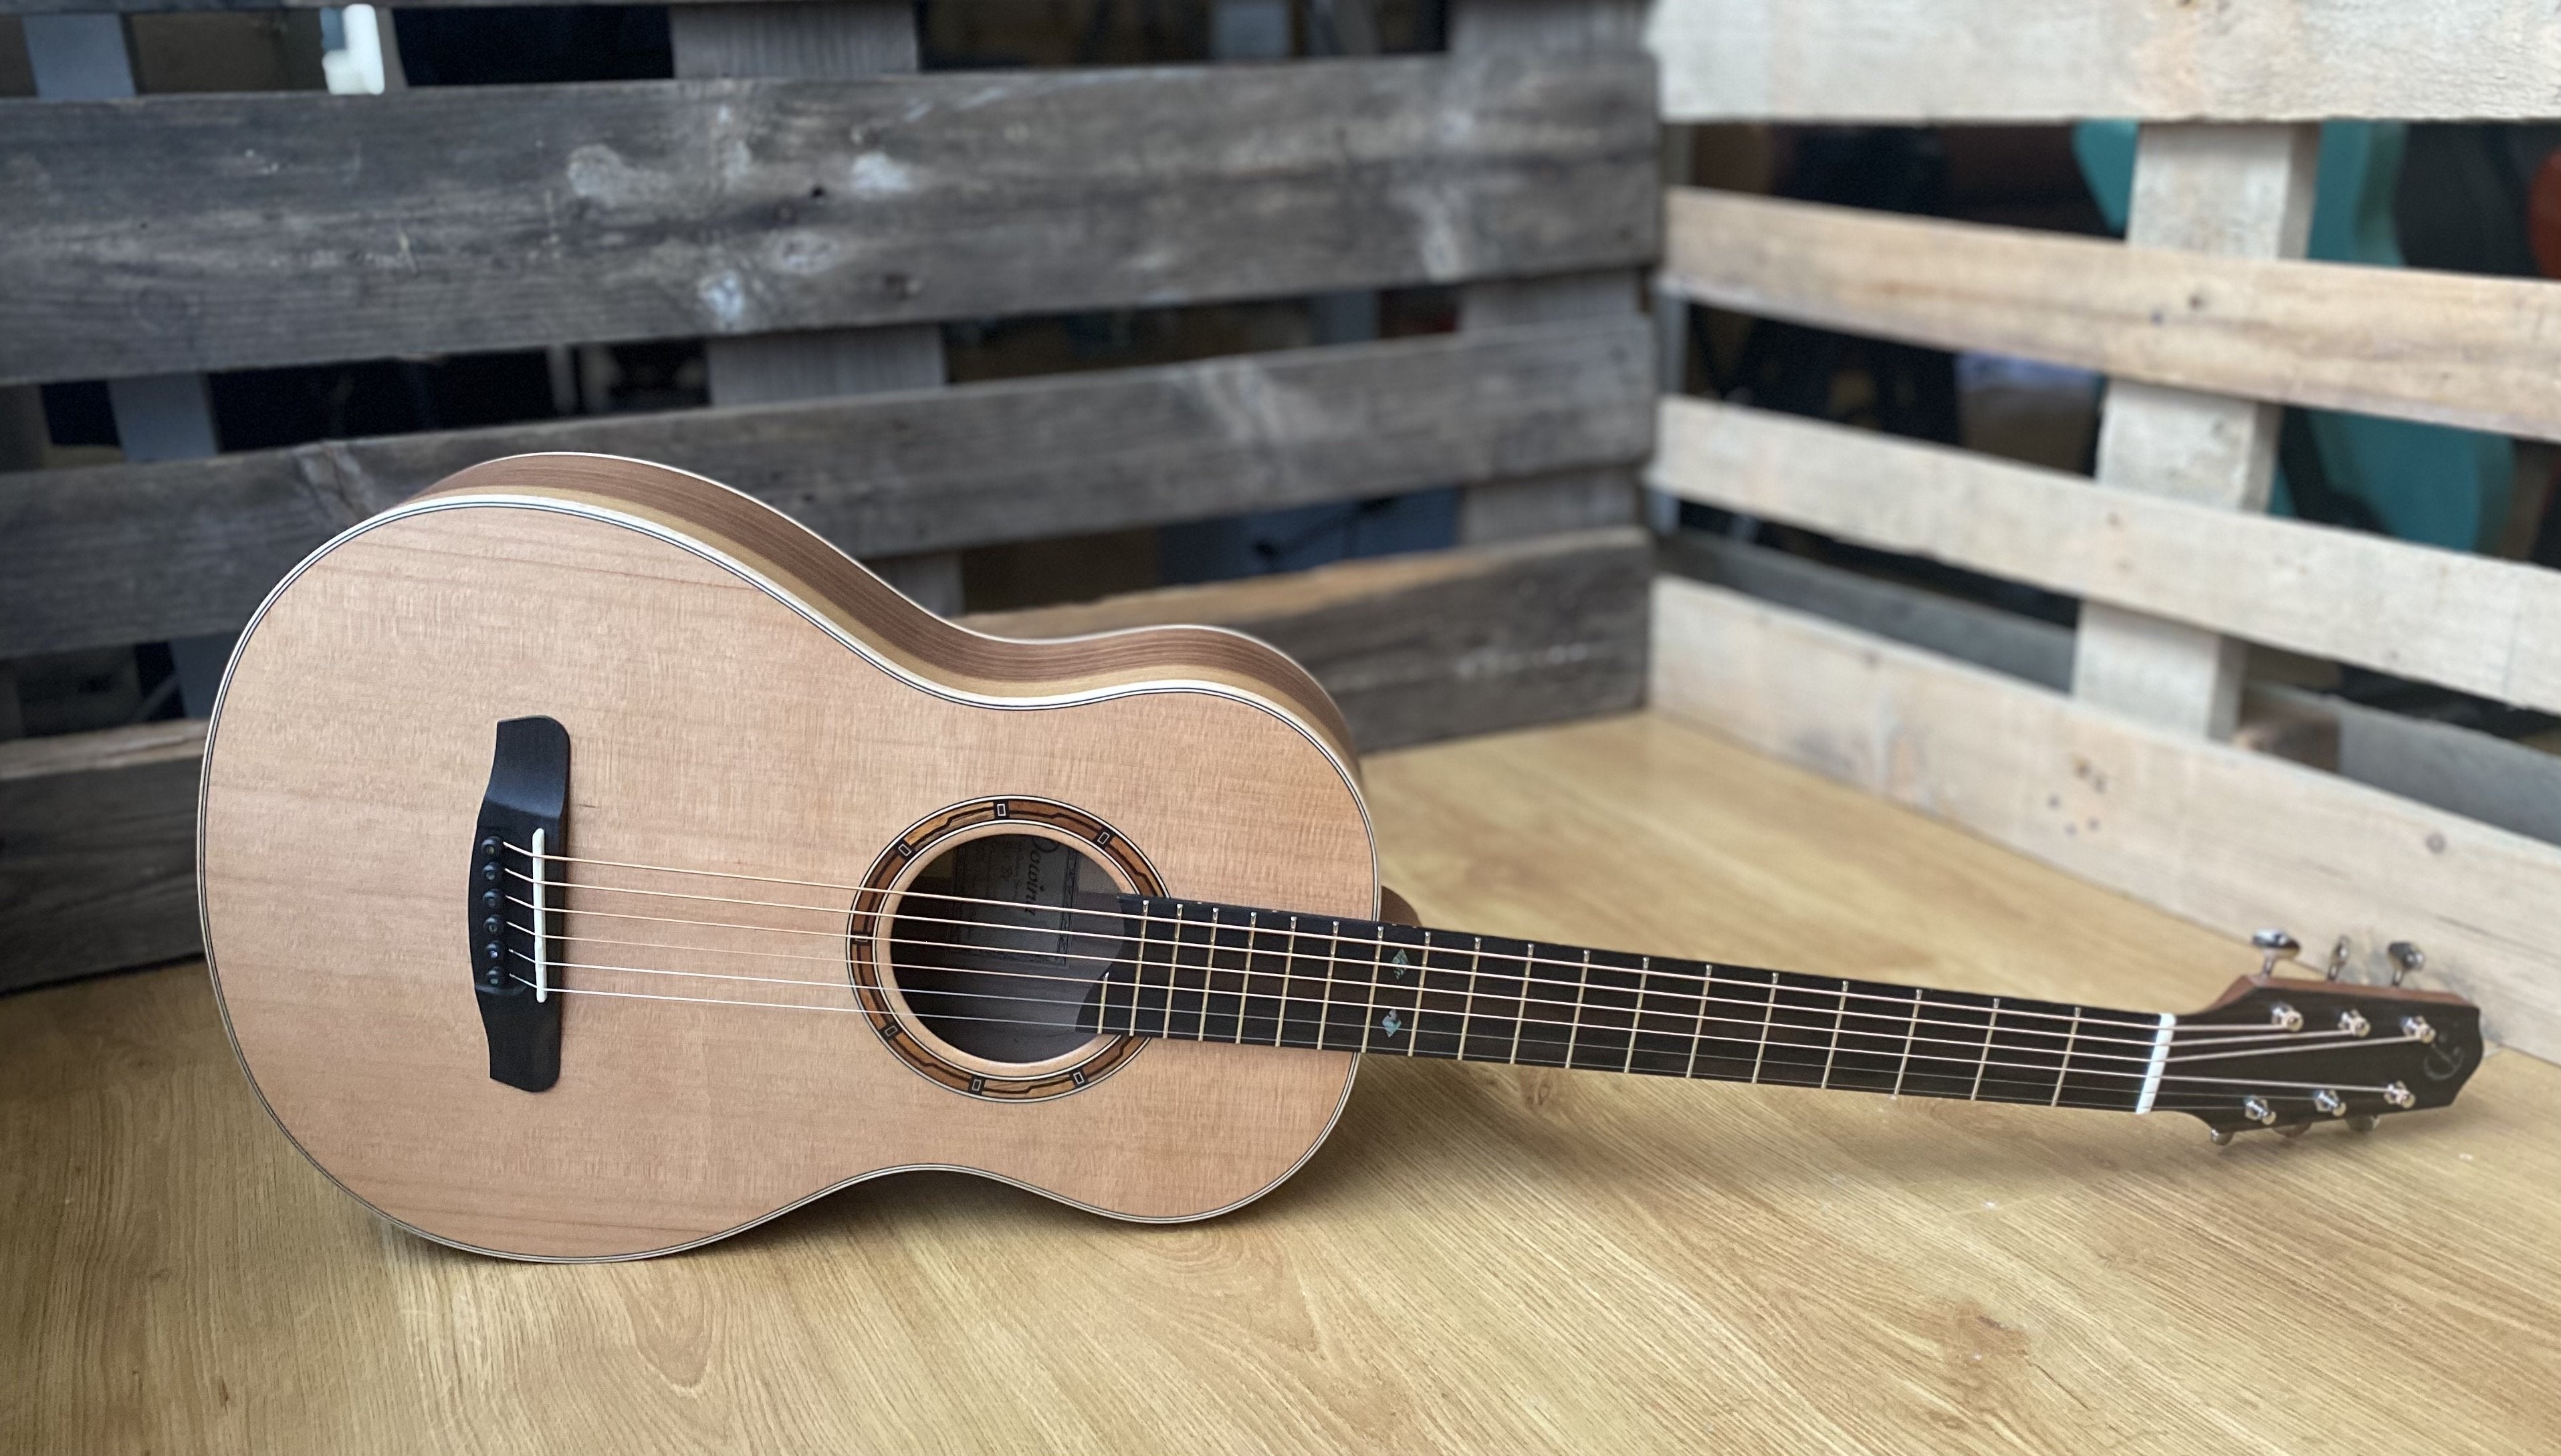 Dowina Walnut (Sol) BV, Acoustic Guitar for sale at Richards Guitars.